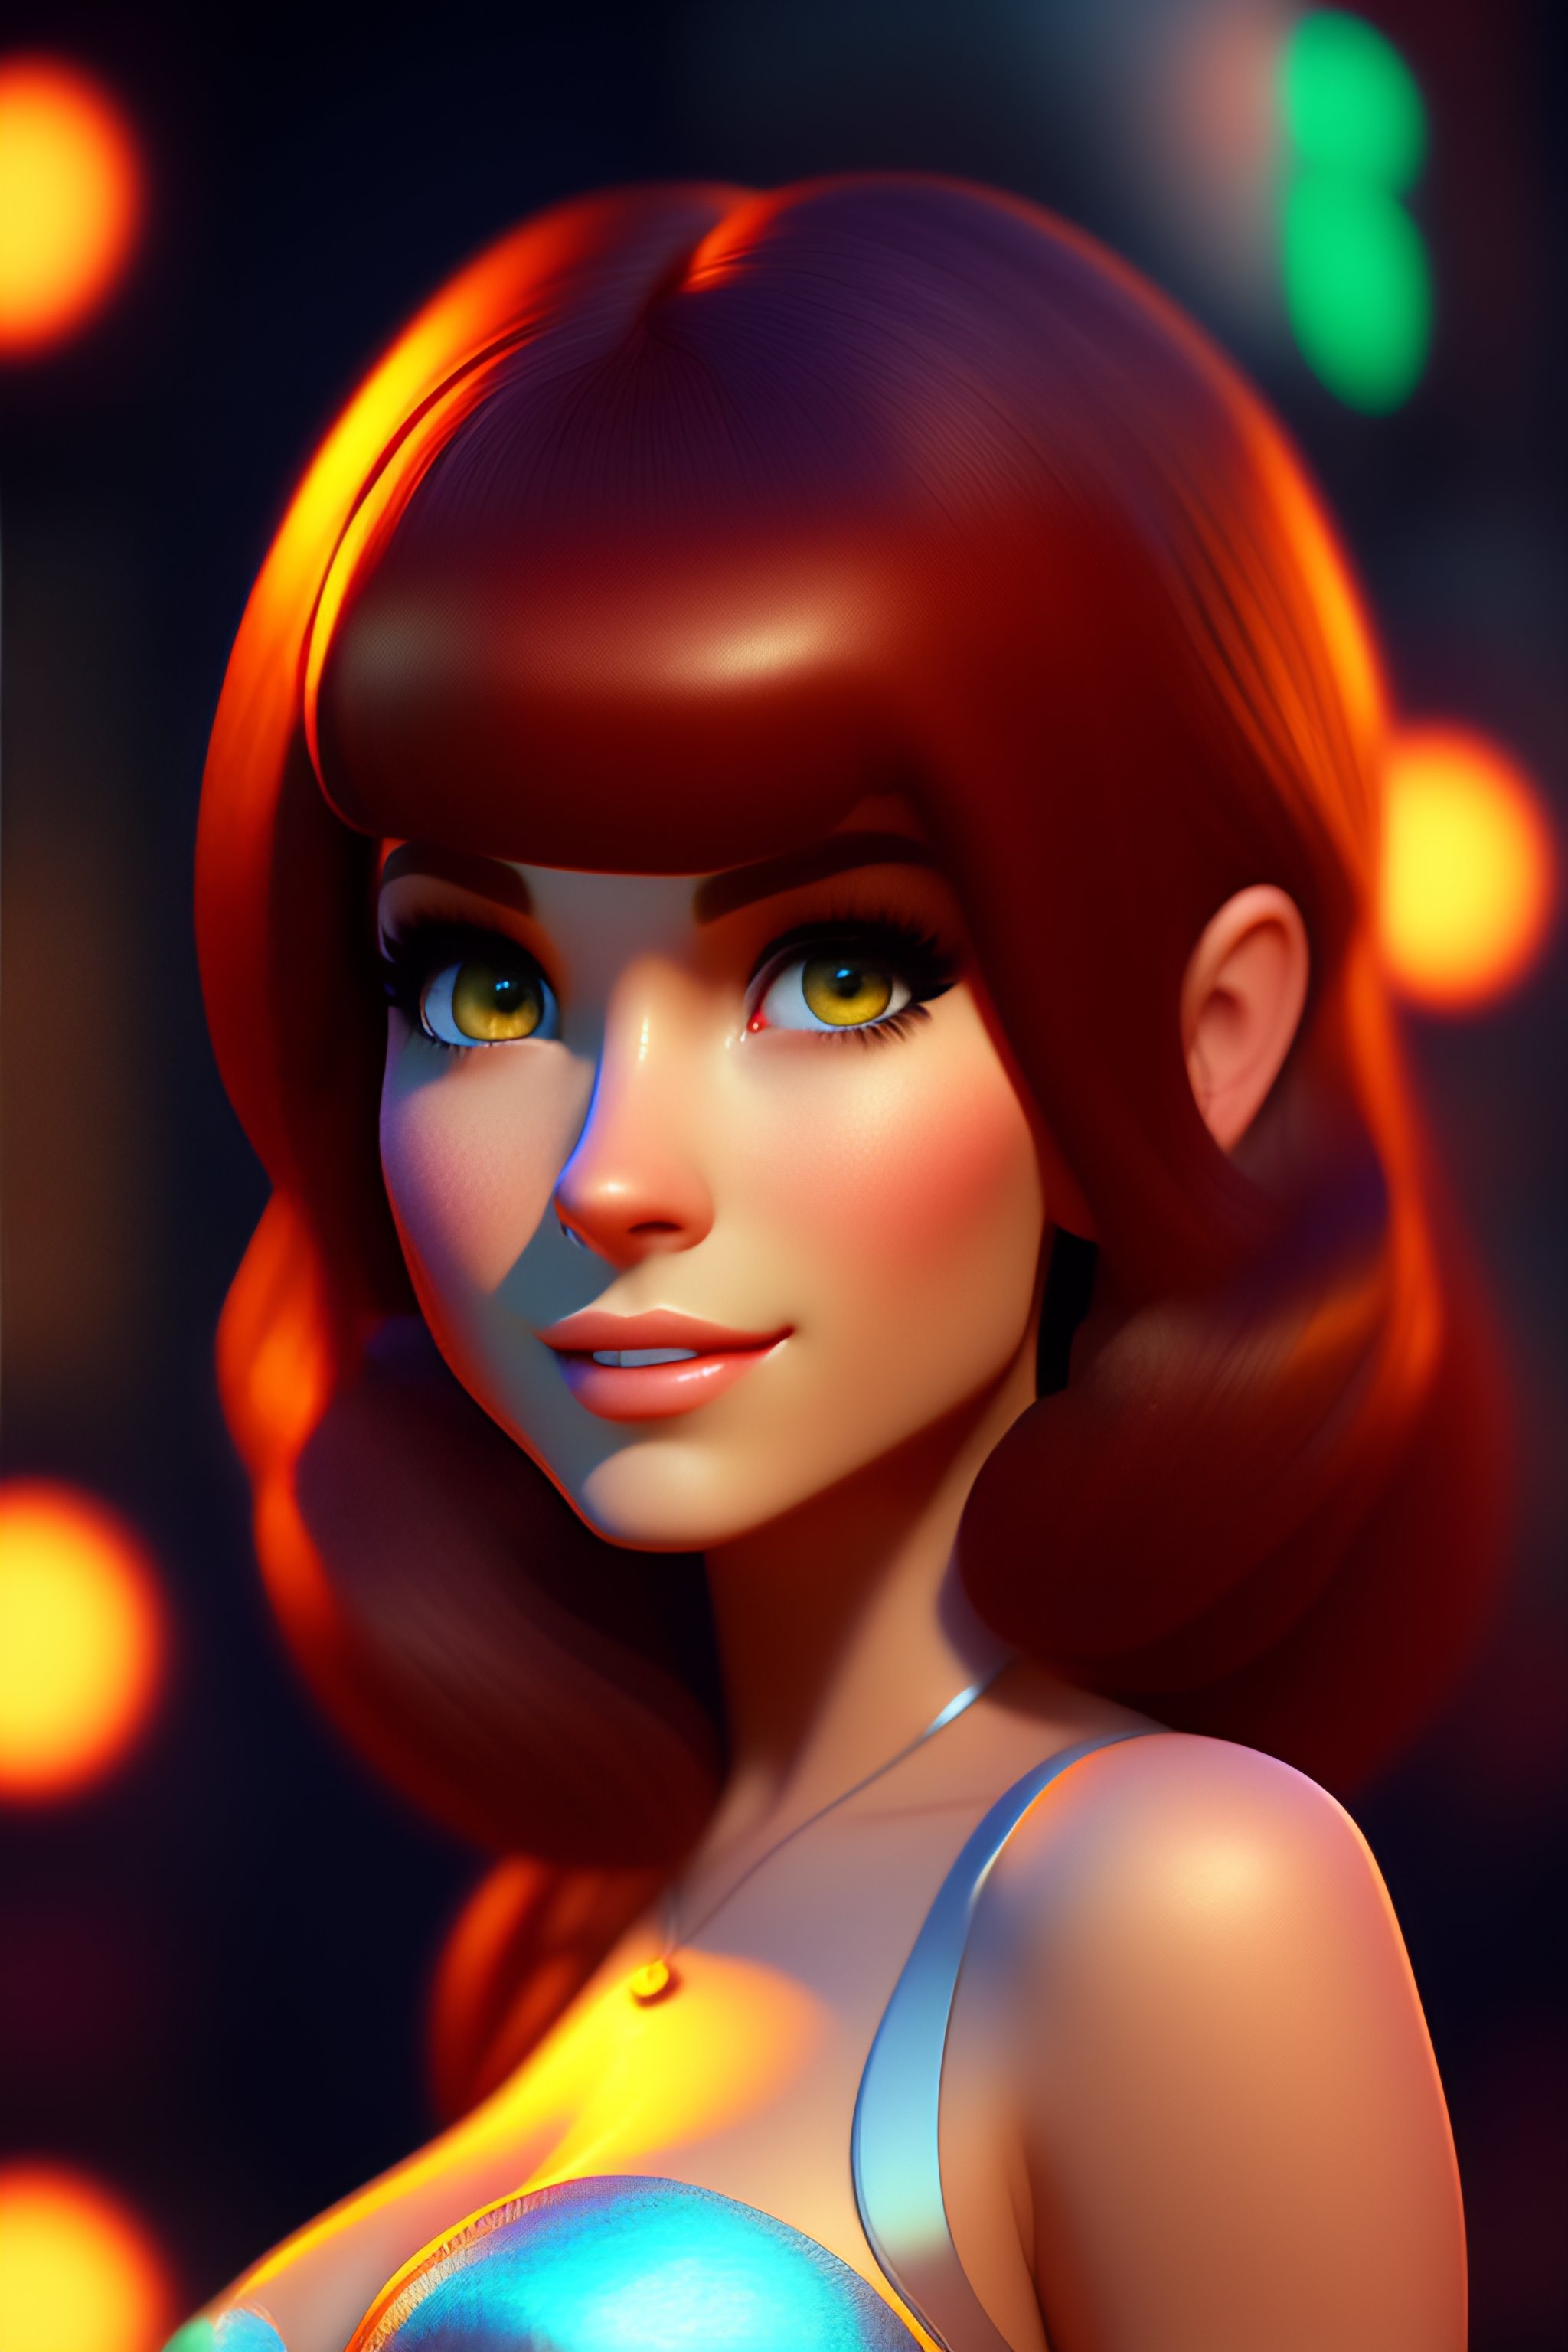 Lexica - Very hot girl, without bra, without pan, pixar style, 3d style,  disney style, 8k, beautiful